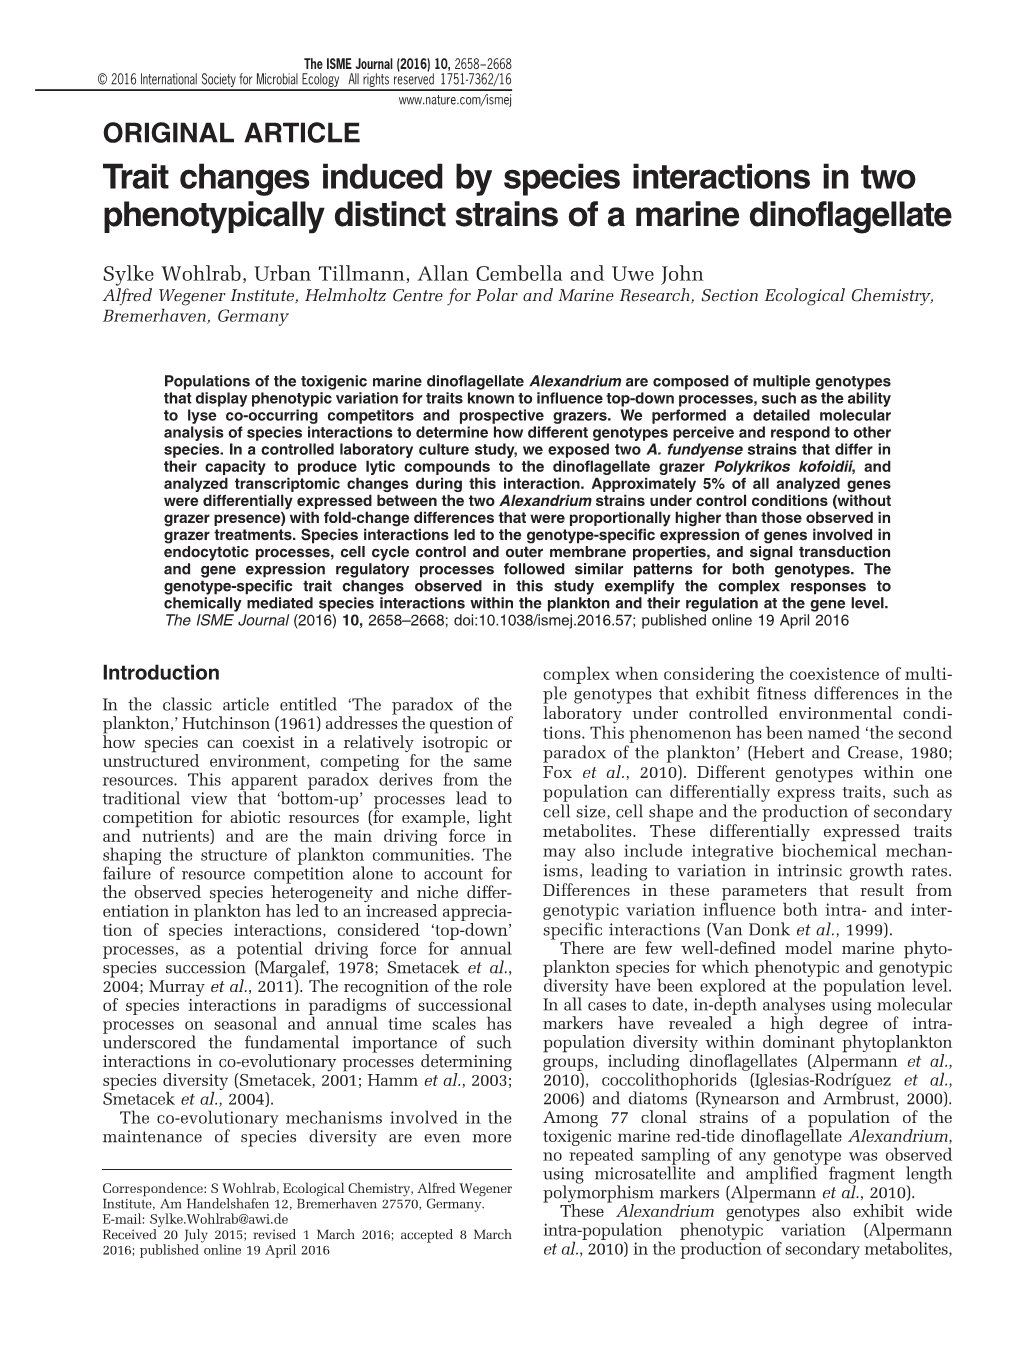 Trait Changes Induced by Species Interactions in Two Phenotypically Distinct Strains of a Marine Dinoflagellate